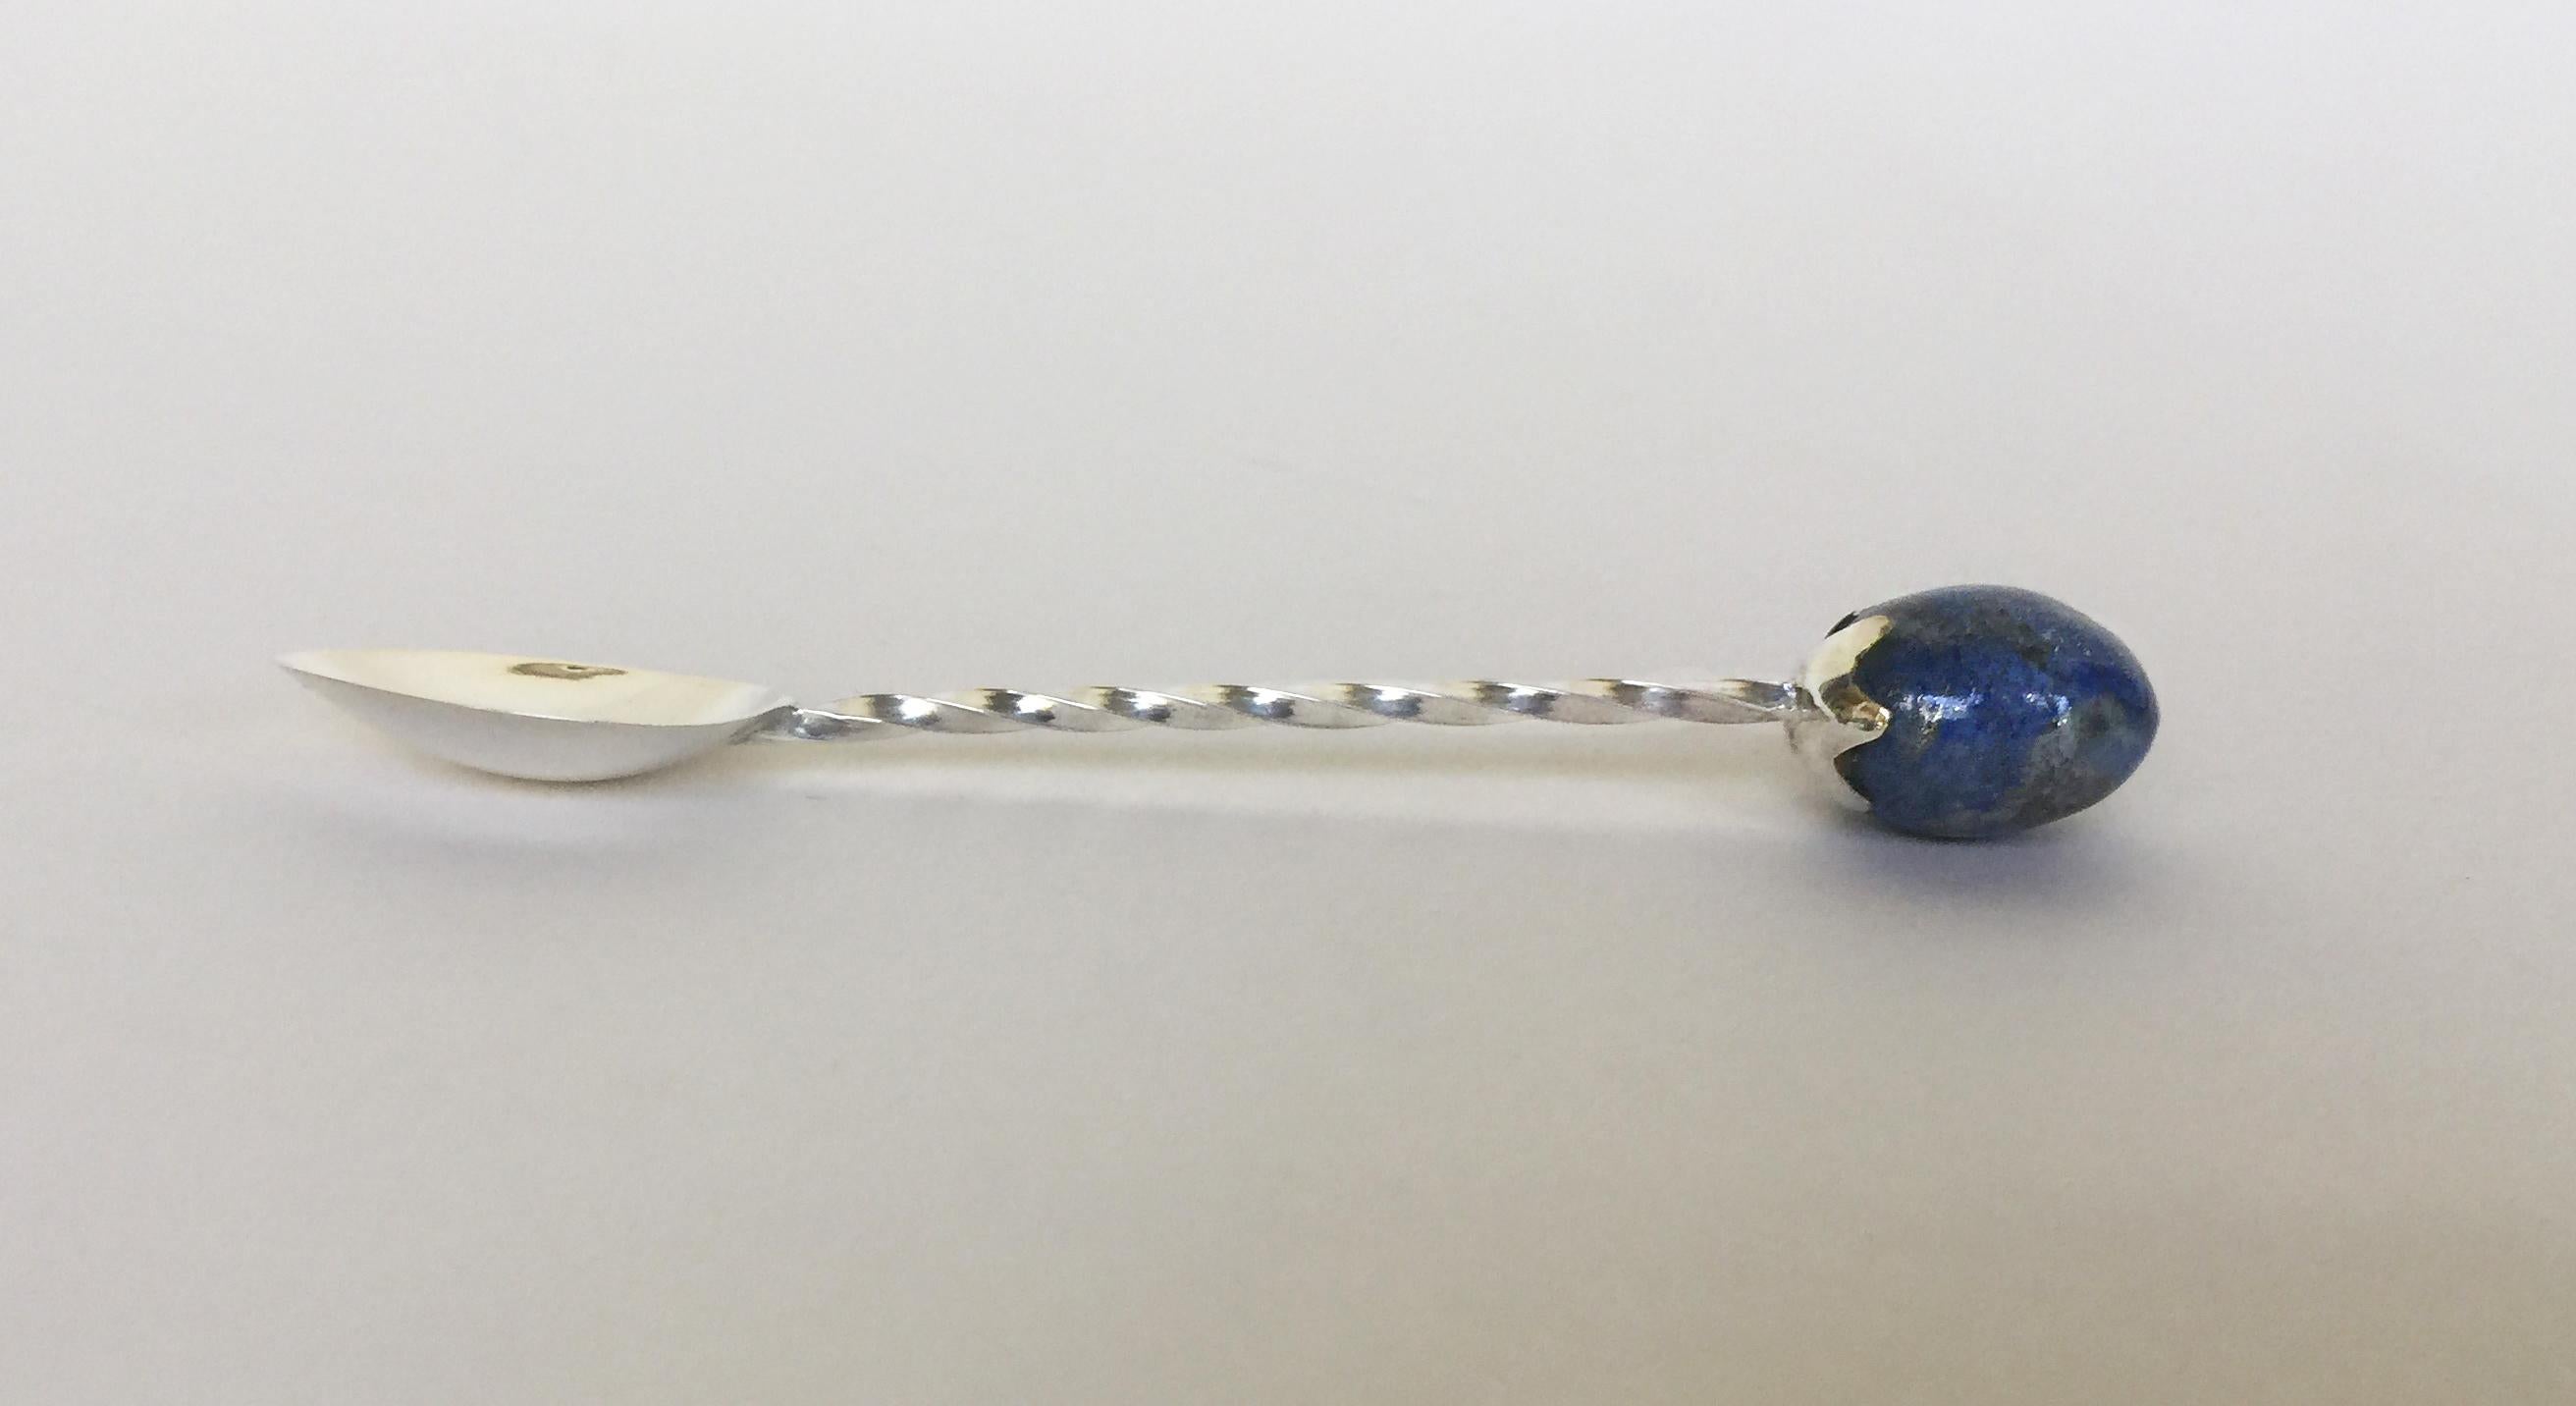 Marina J 6 Rhodium Plated Sterling Silver Tea Spoon Set with Lapis Lazuli Stones In Excellent Condition For Sale In Los Angeles, CA